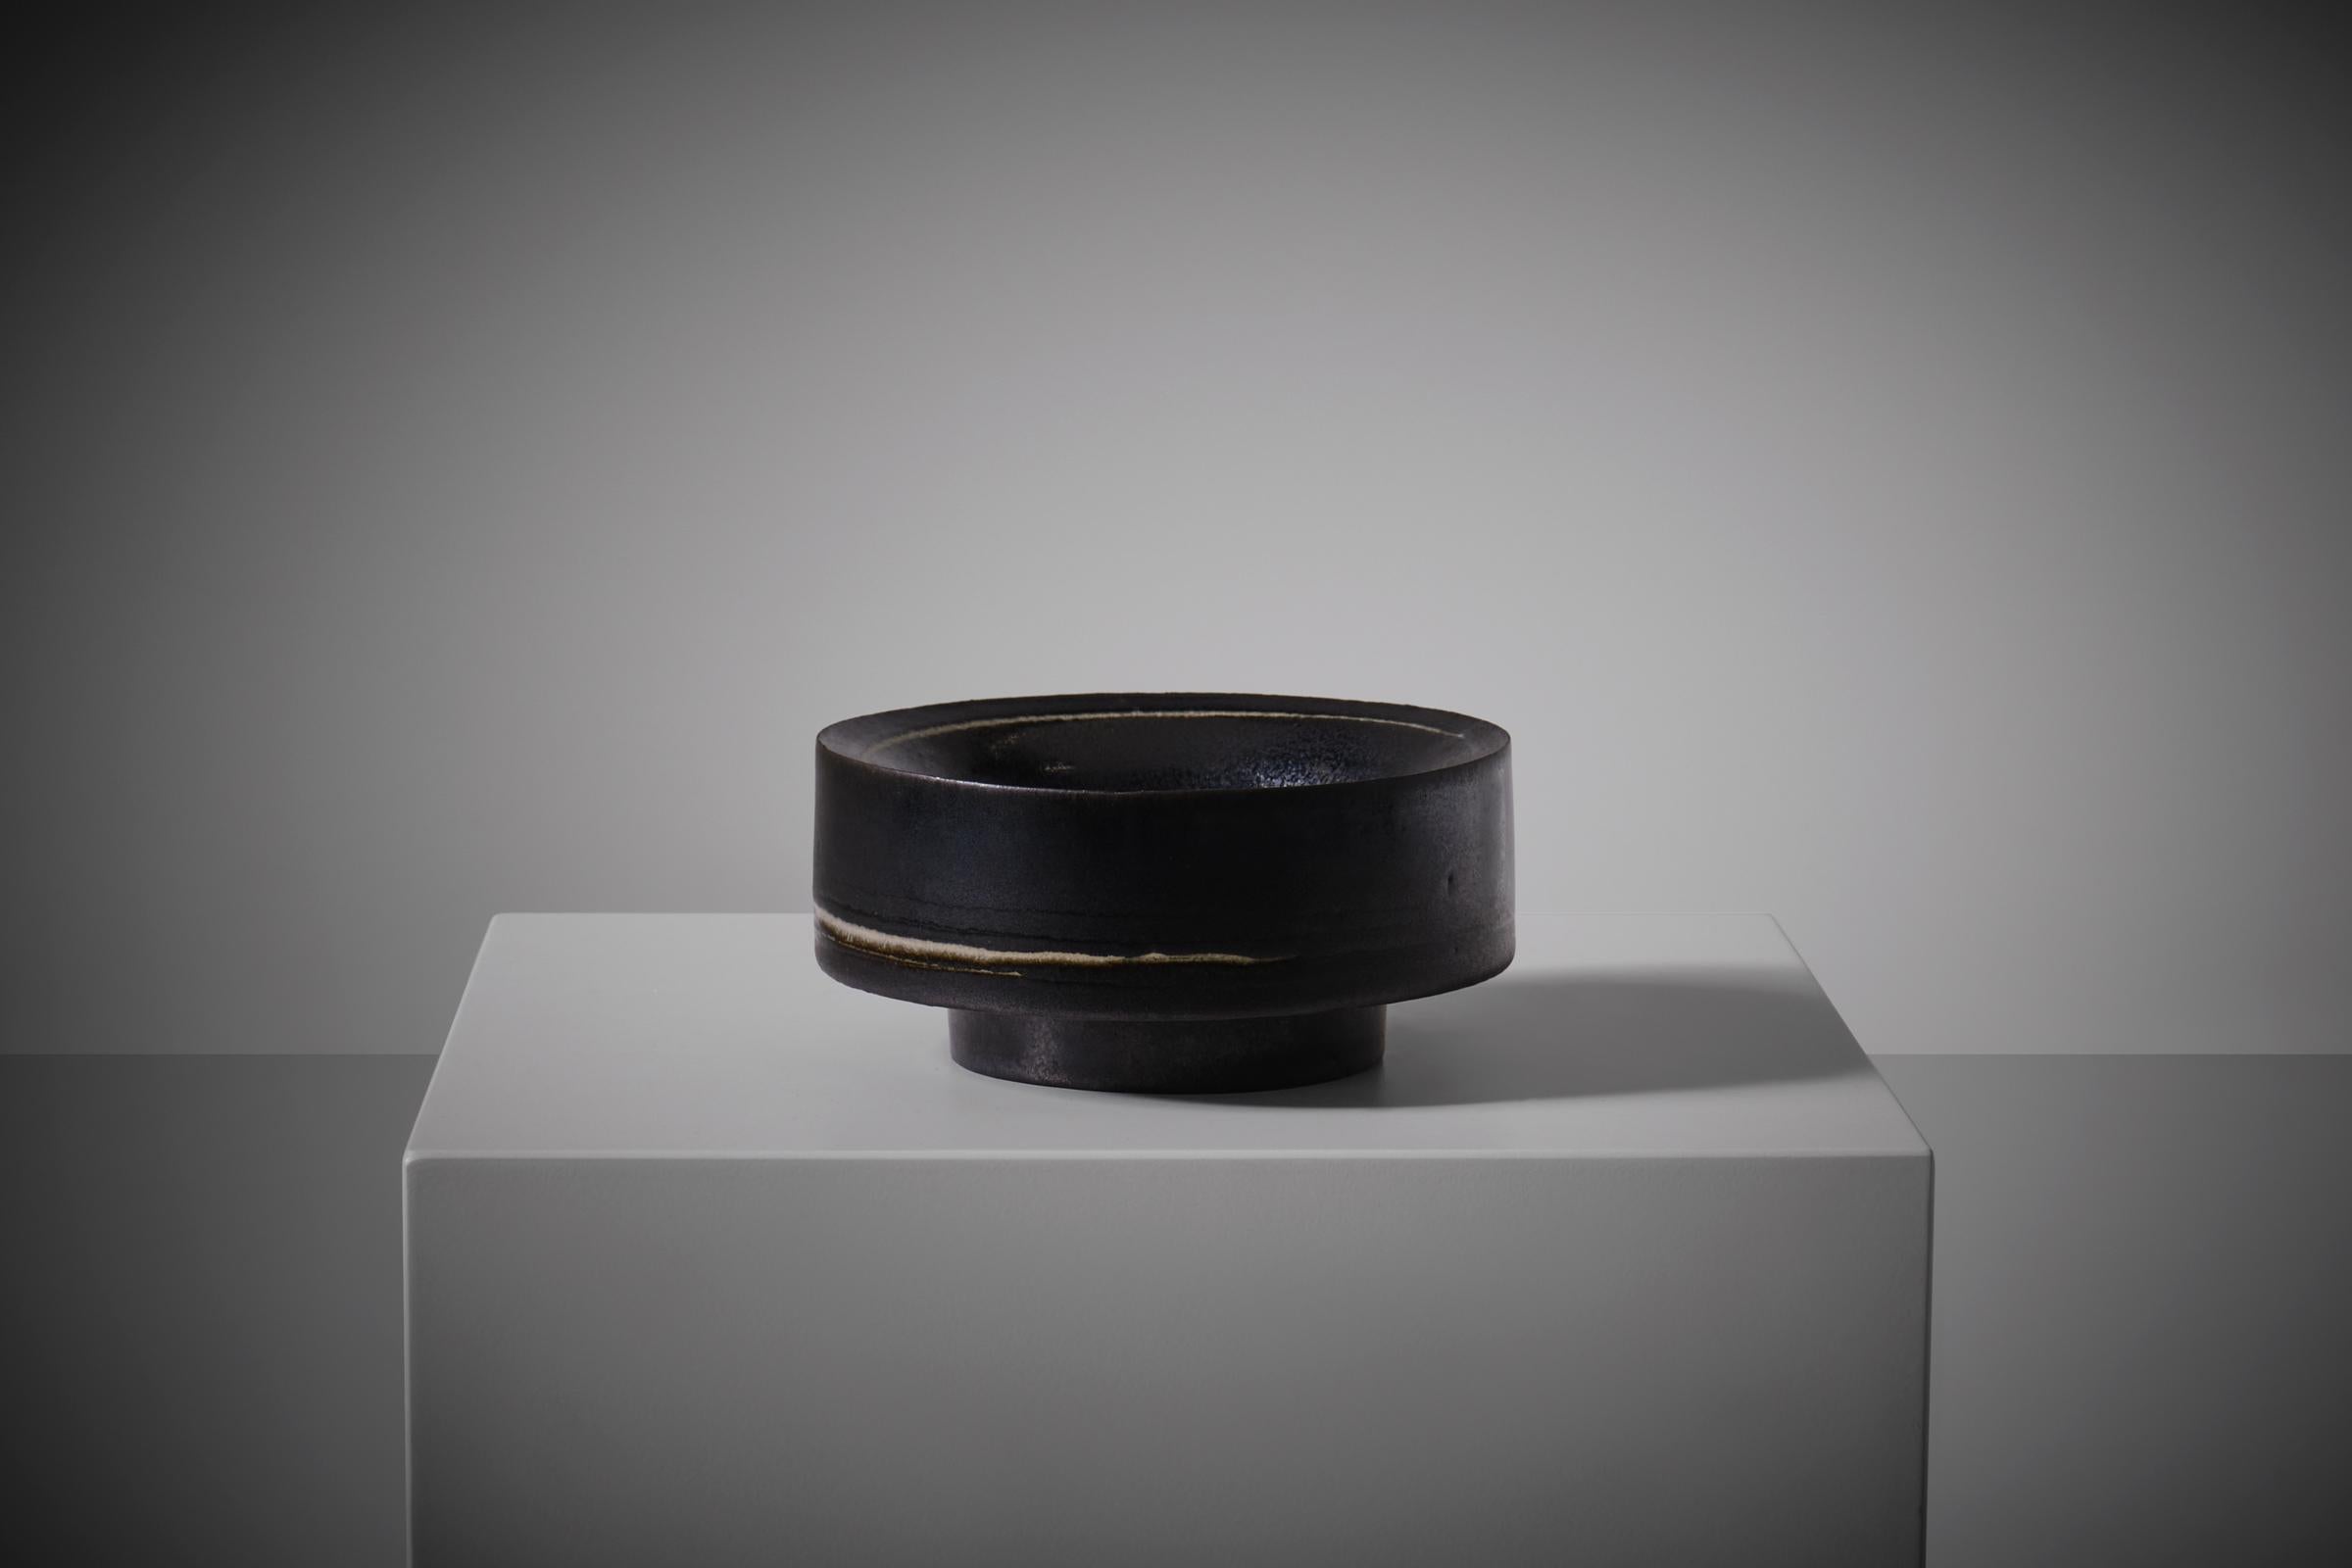 Ceramic bowl by Carlo Zauli, Italy 1960s. Exceptionally work in black ceramic with a refined yet minimal line decoration in off white with a brown outline. The lines create a nice contrast with the dark surface and point out the circular shape. The